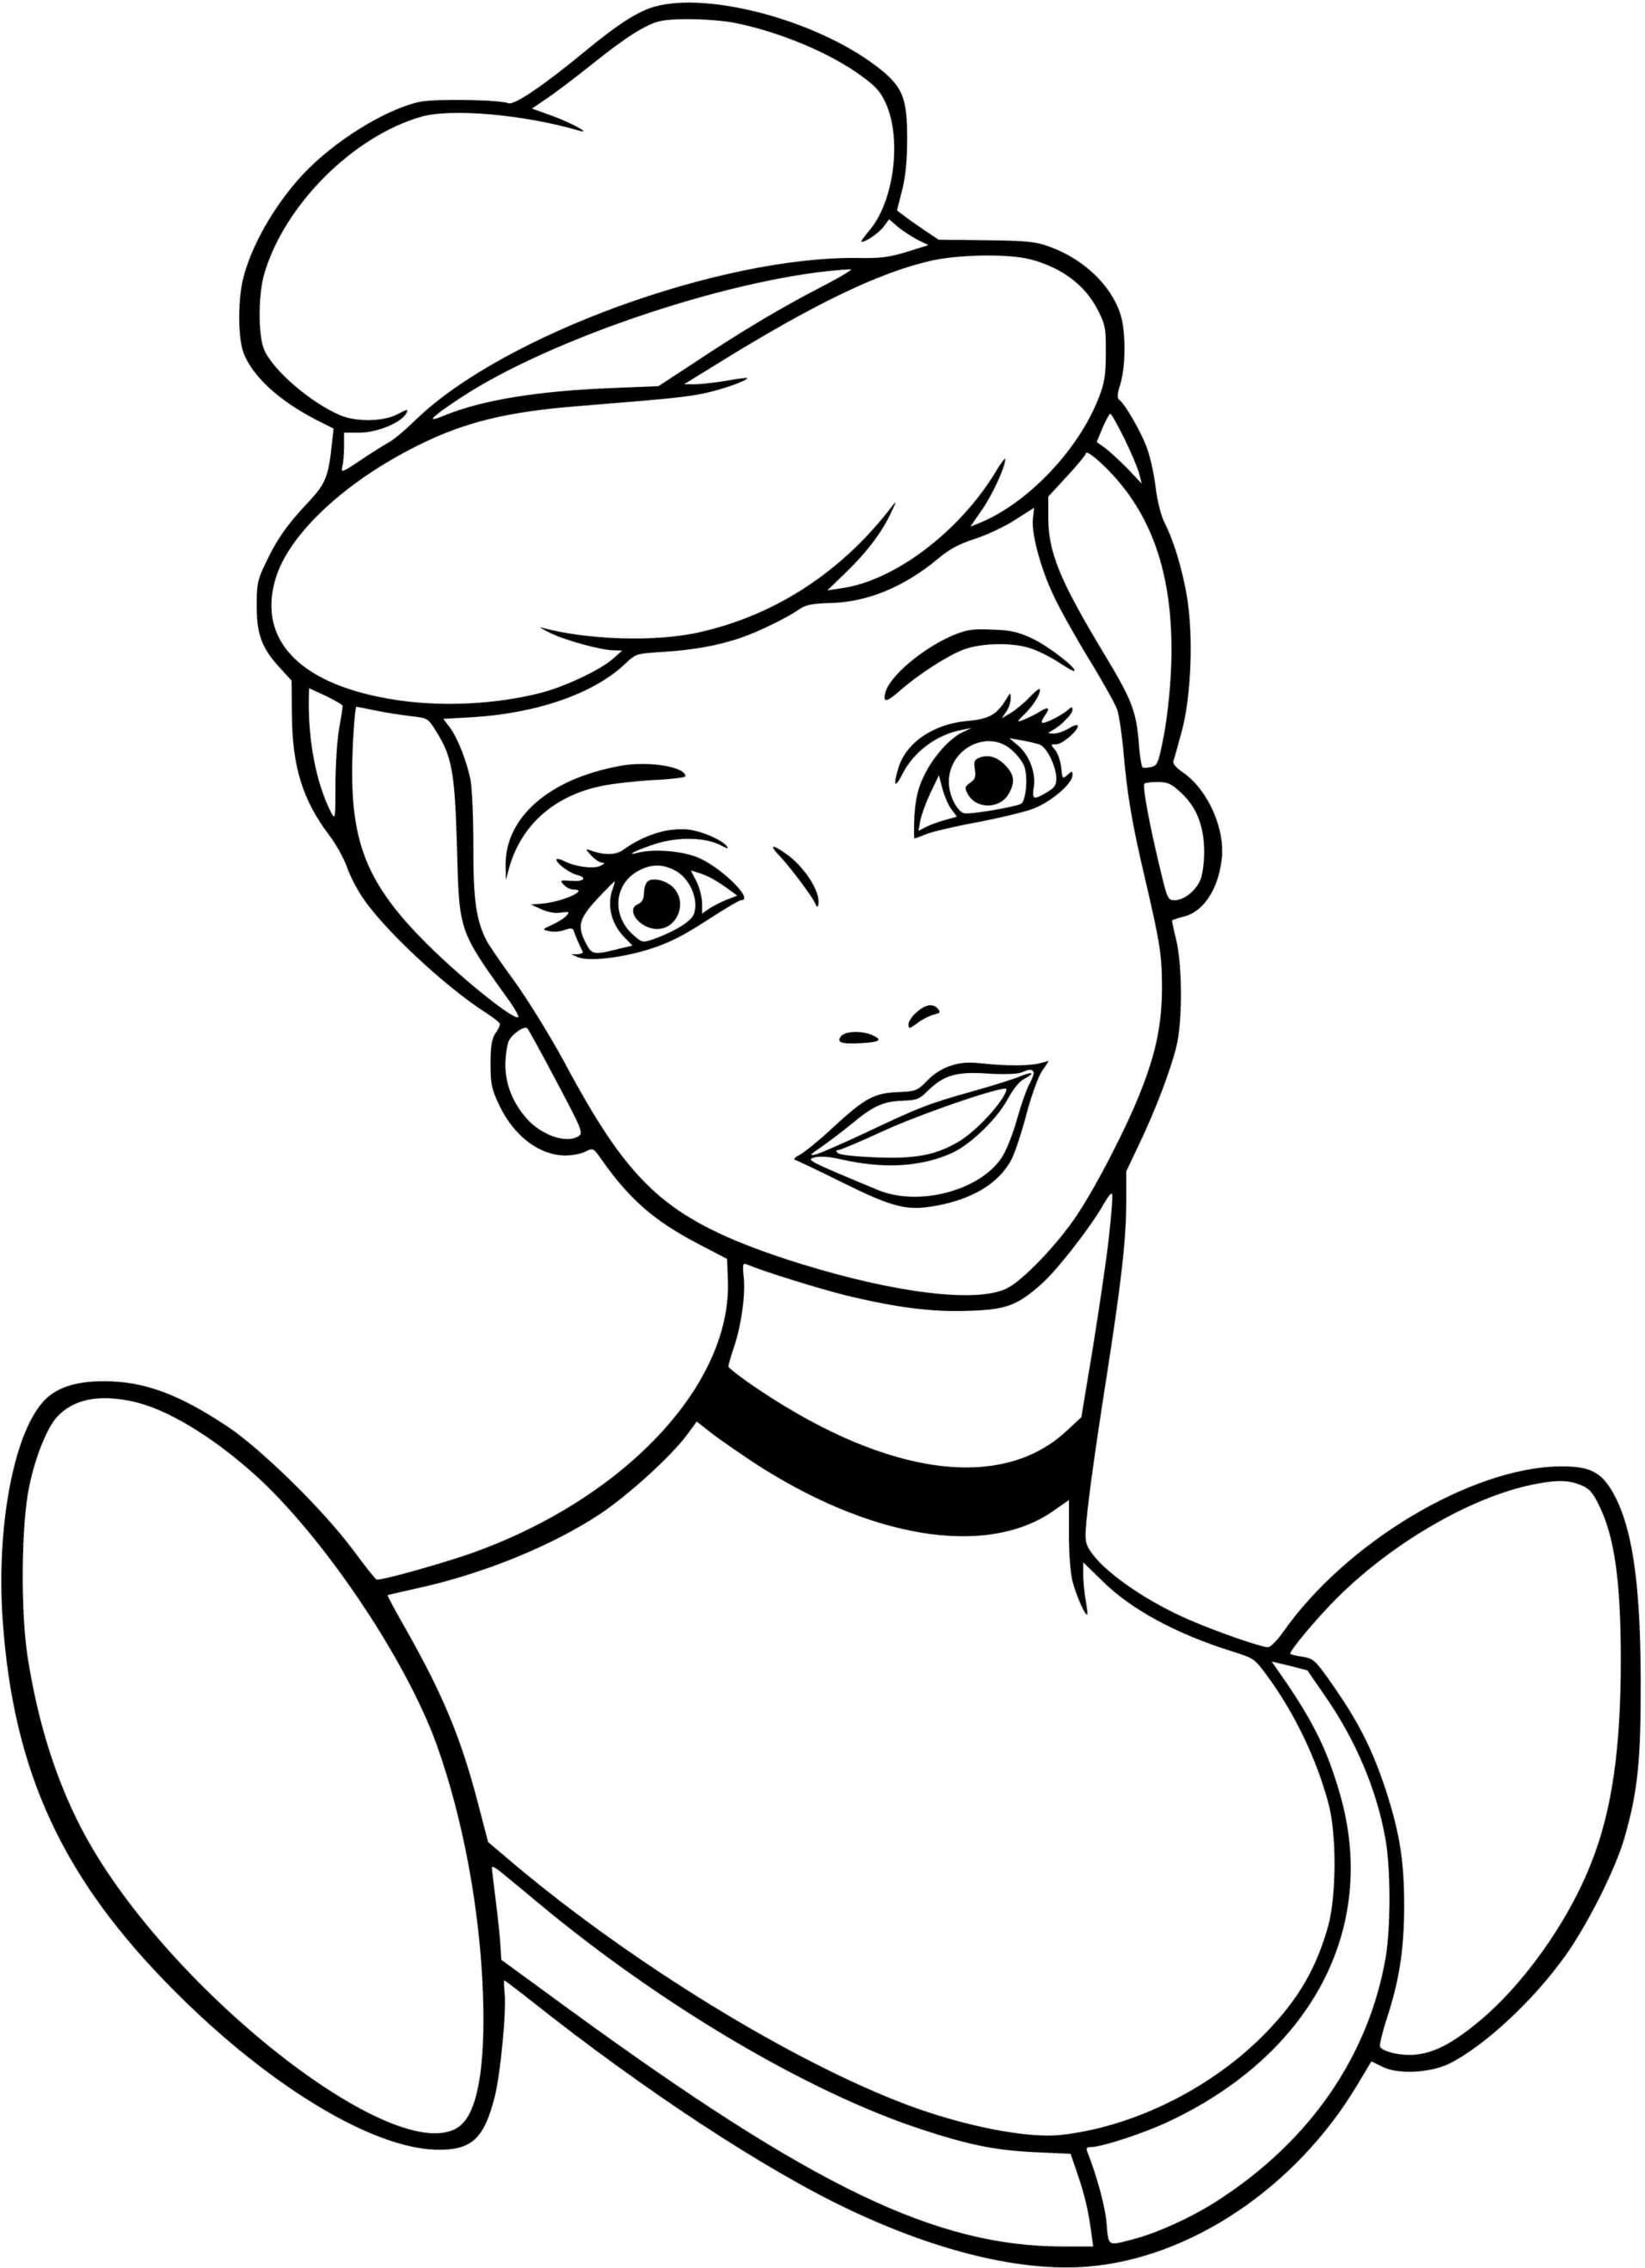 8100 Coloring Pages Disney Princess  Latest Free